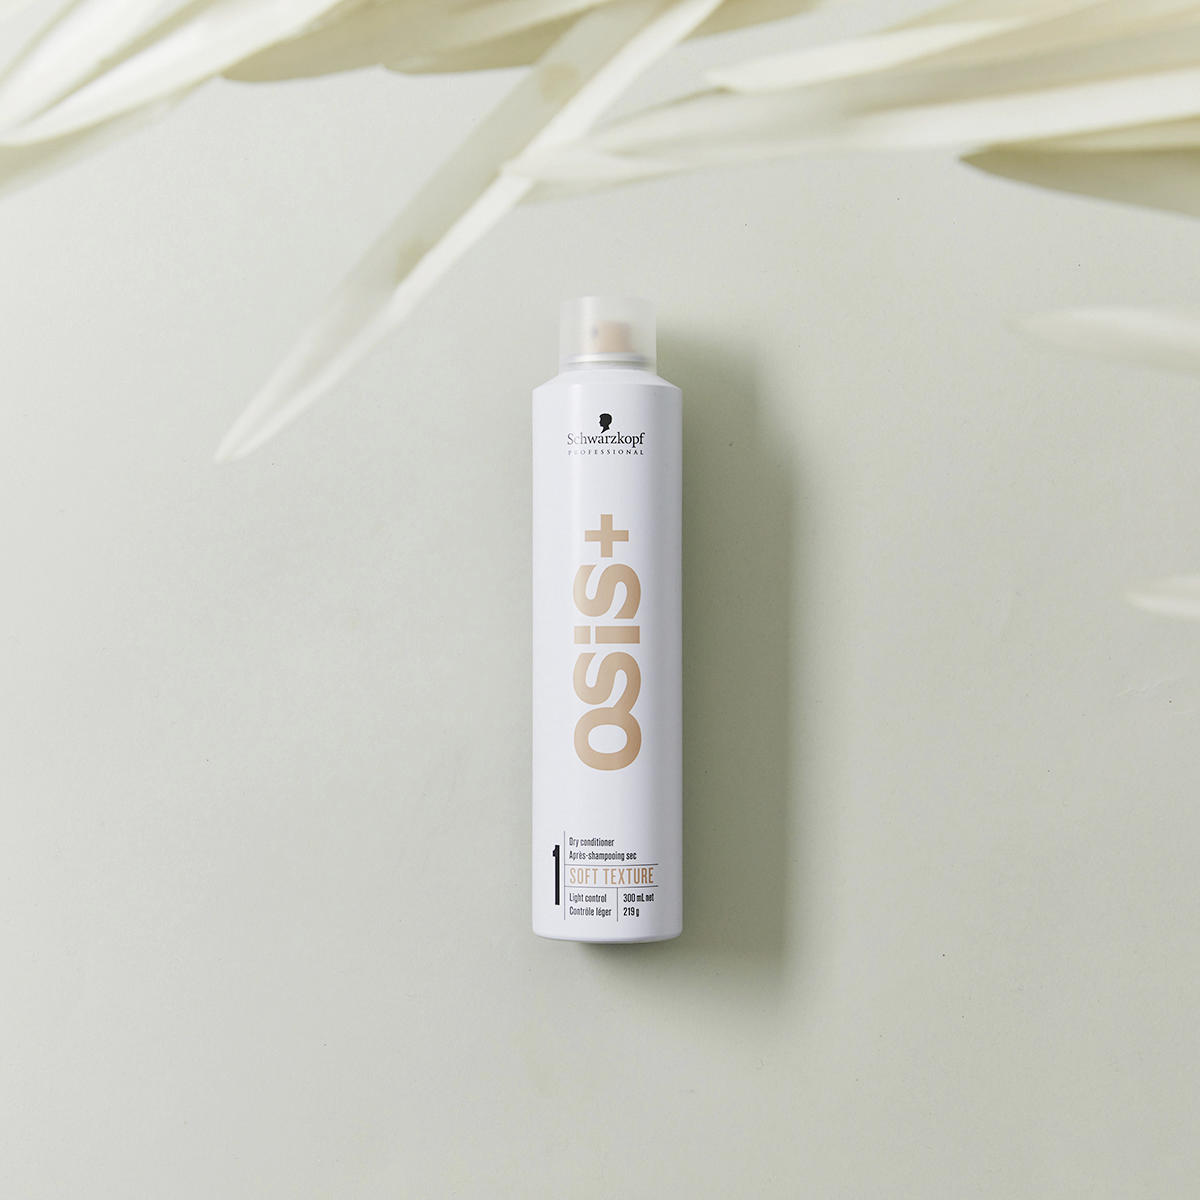 Schwarzkopf Professional OSIS+ Core Long Texture Soft Texture Dry Conditioner 300 ml - 4